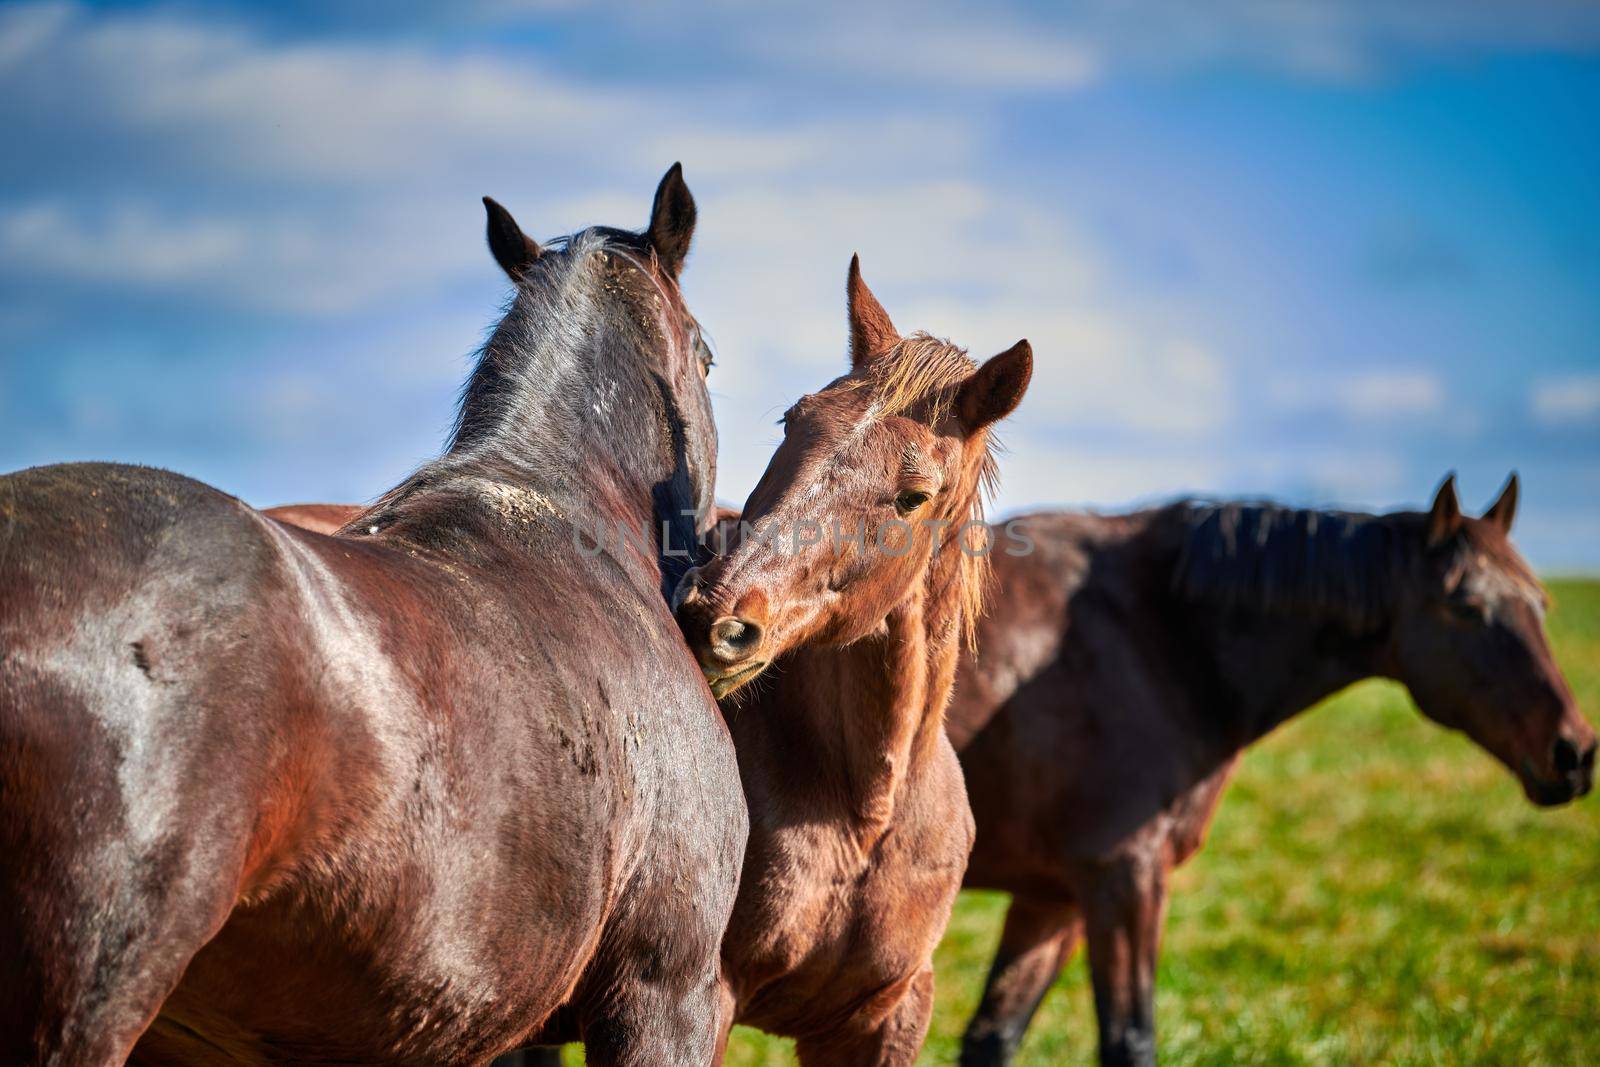 Horses nibbling on each other with blurry background.